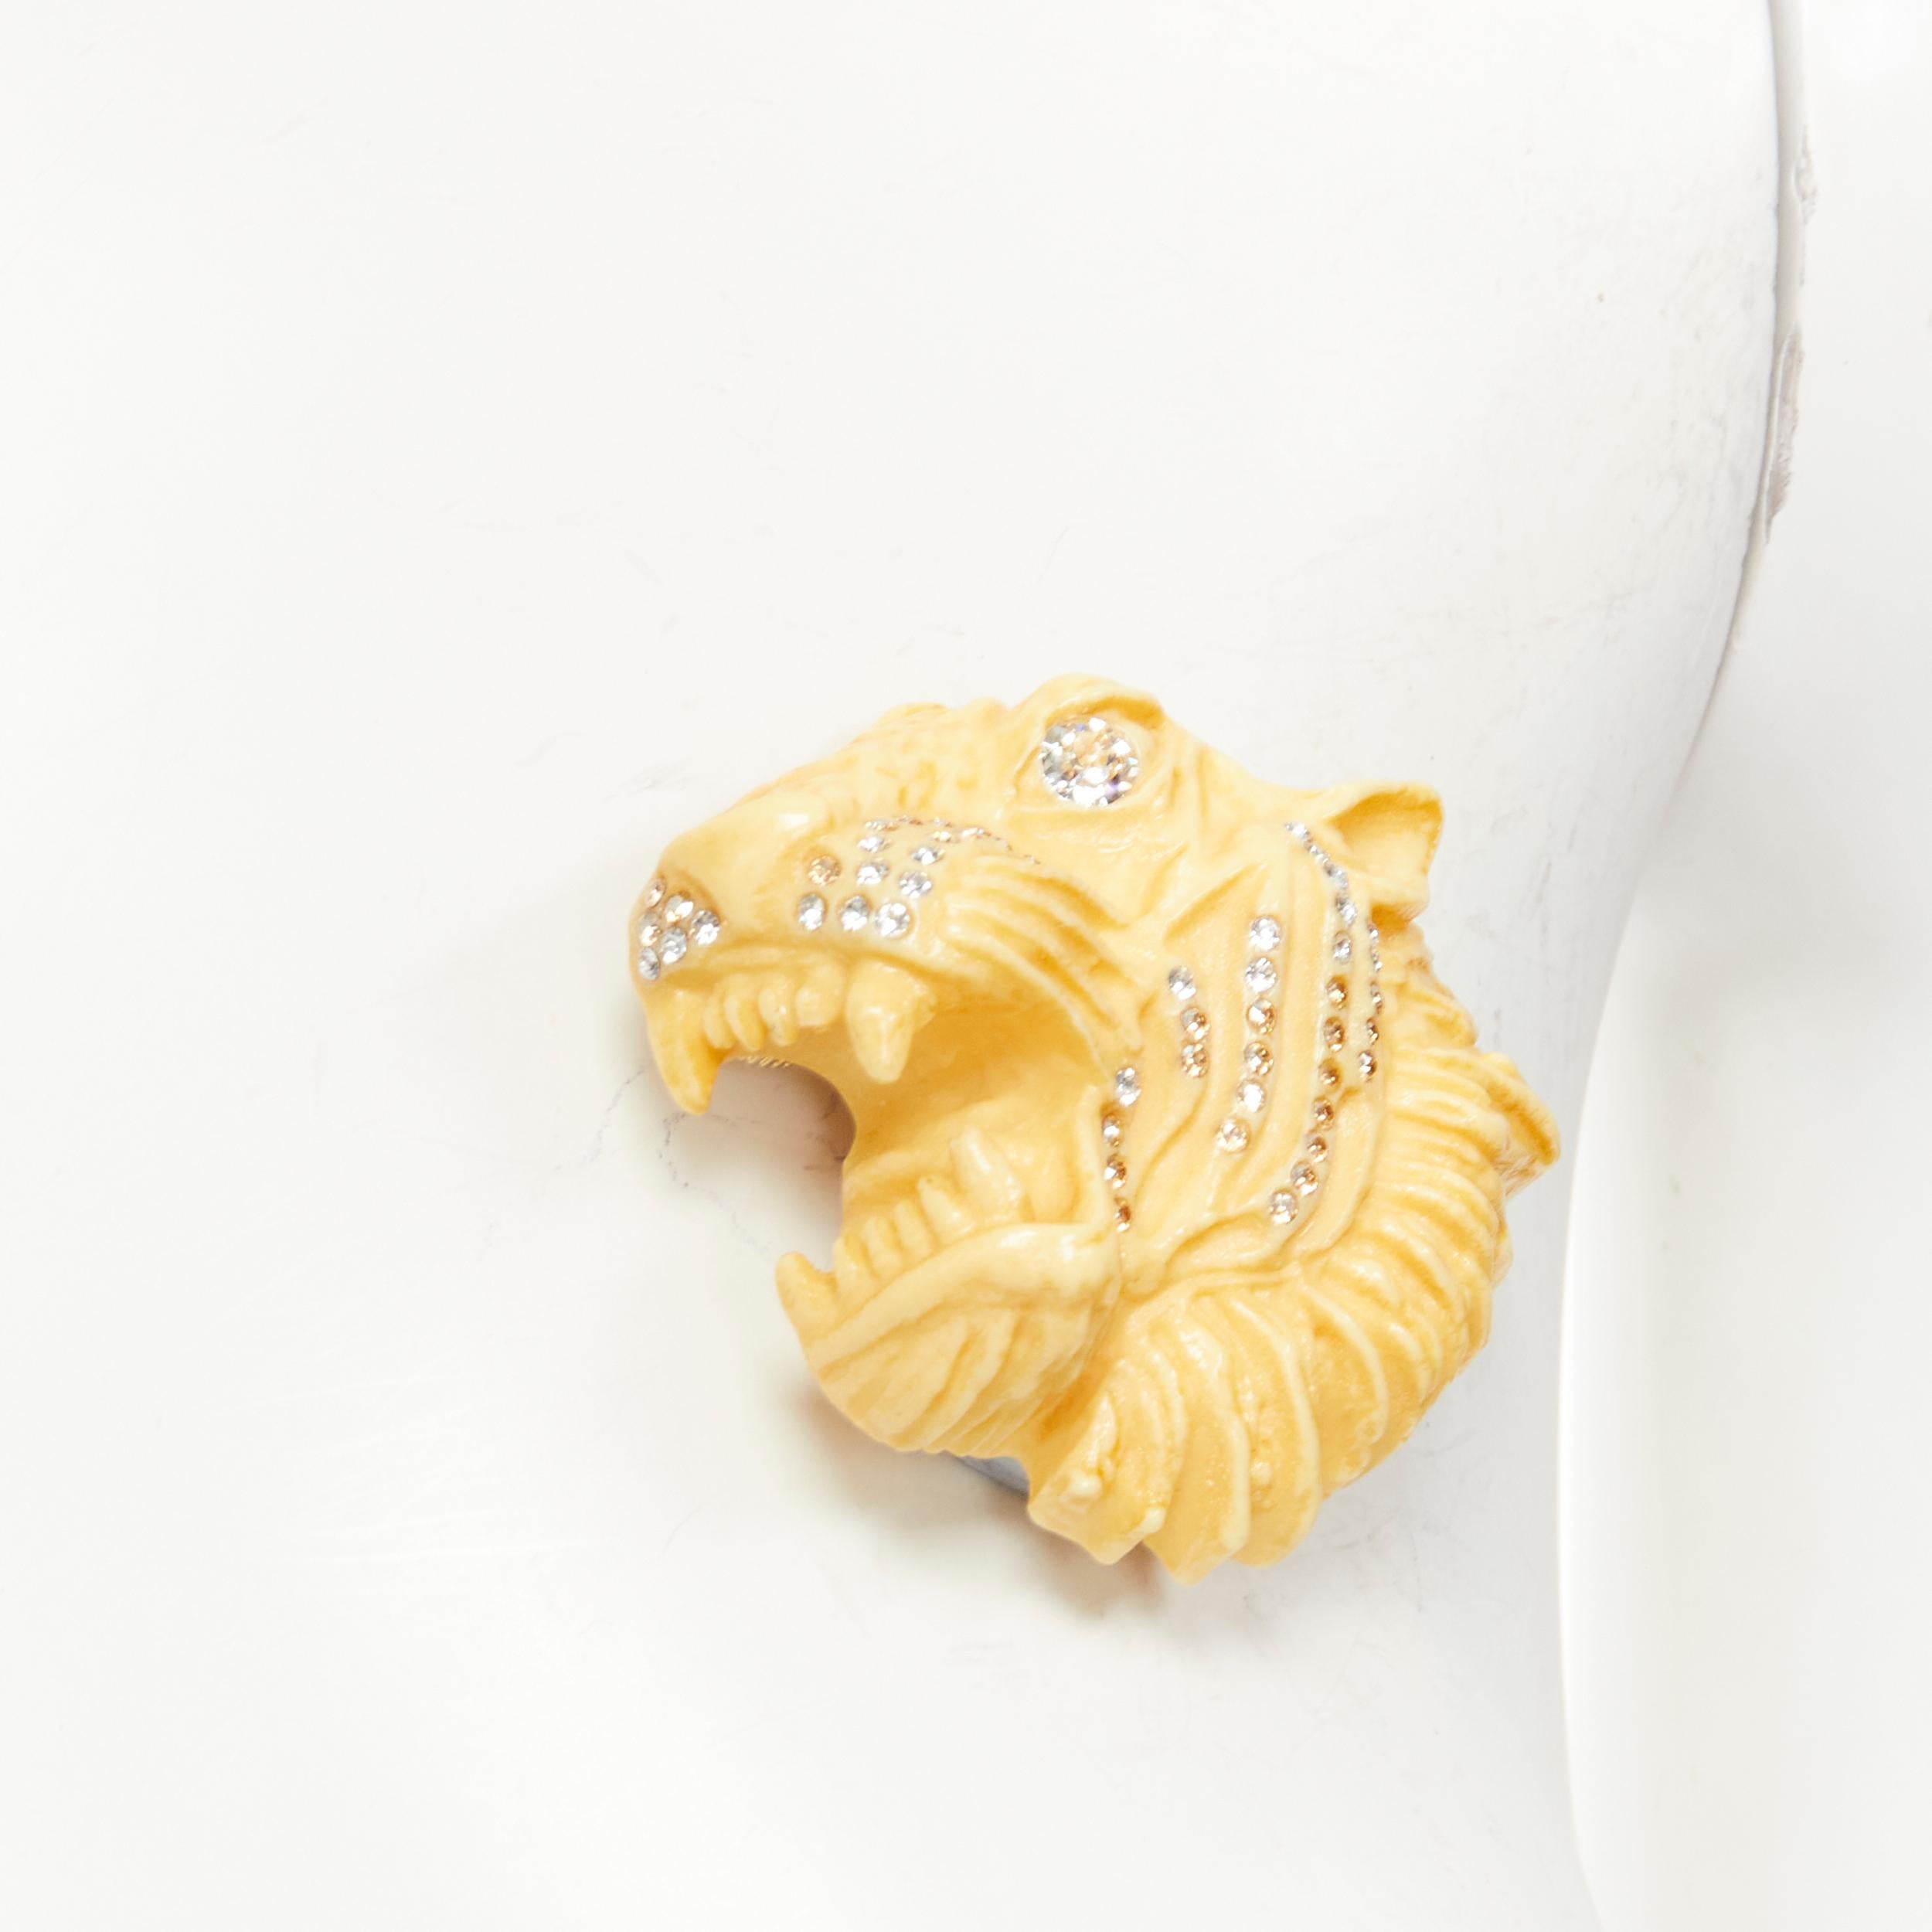 new GUCCI ALESSANDRO MICHELE Runway ivory resin crystal Tiger head pin brooch
Reference: TGAS/C01637
Brand: Gucci
Designer: Alessandro Michele
Collection: Runway
Material: Plastic
Color: Ivory
Pattern: Solid
Closure: Pin
Extra Details: Mixed color